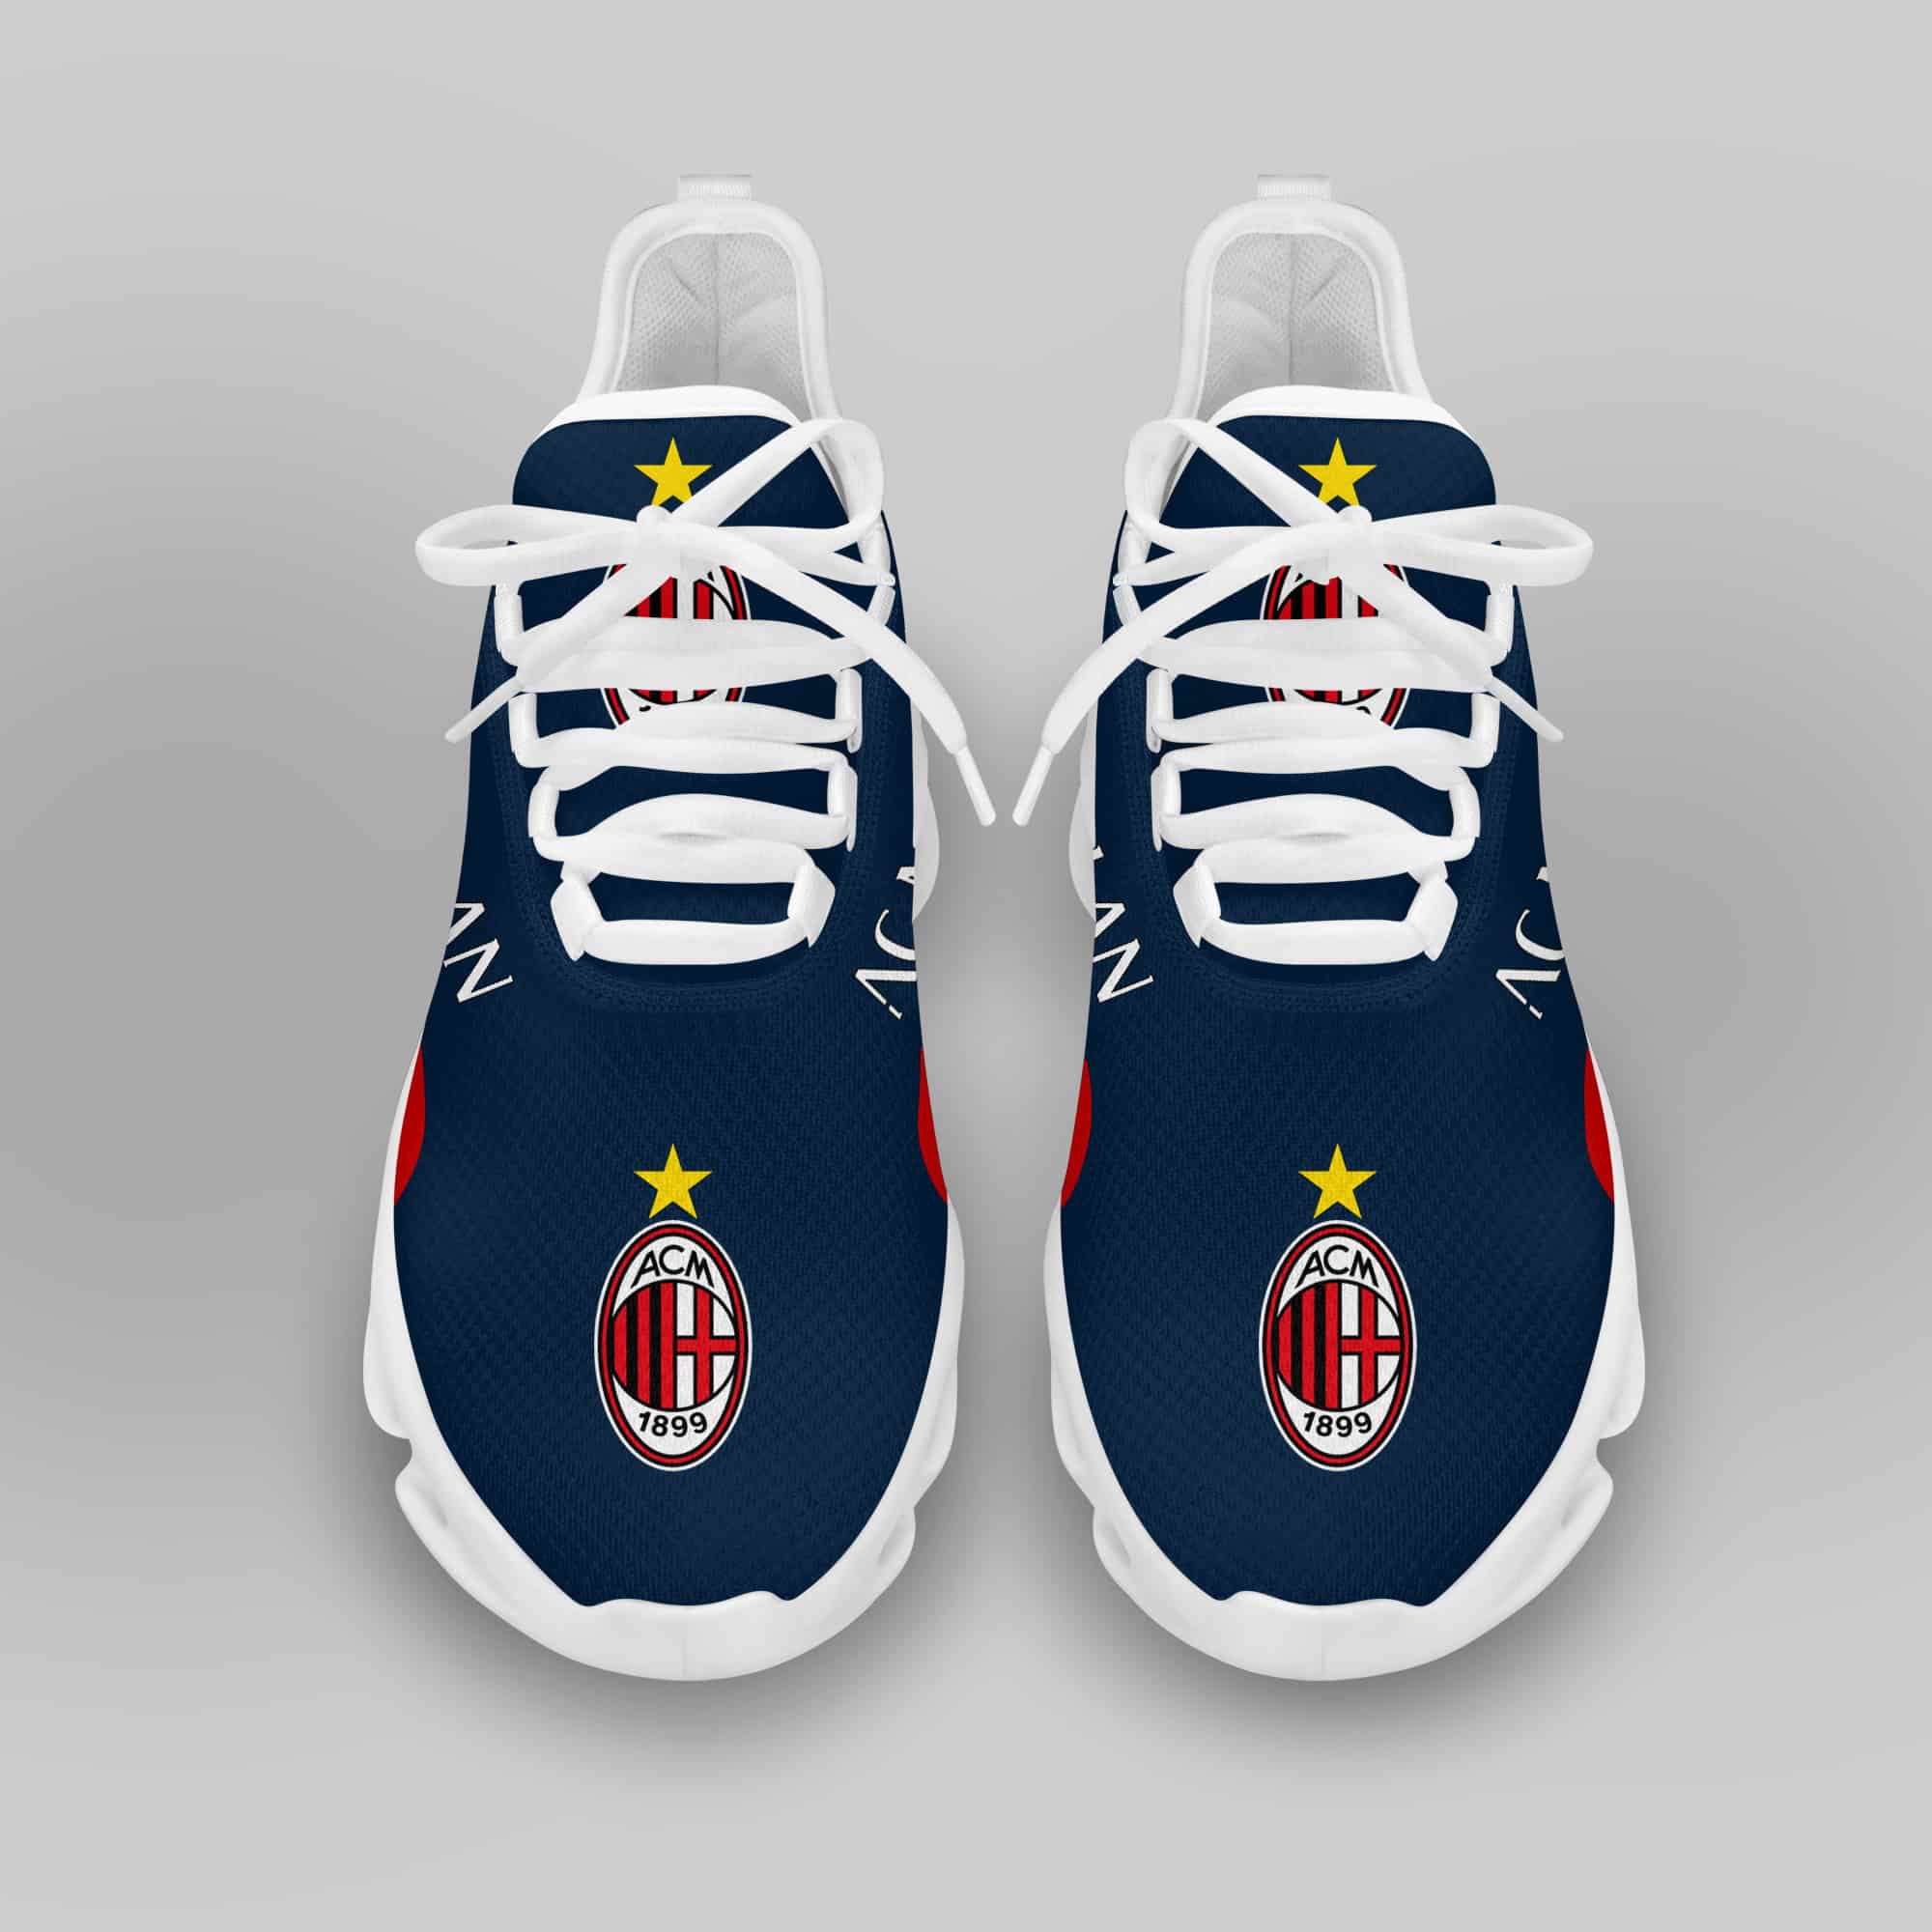 Ac Milan Running Shoes Max Soul Shoes Sneakers Ver 6 3